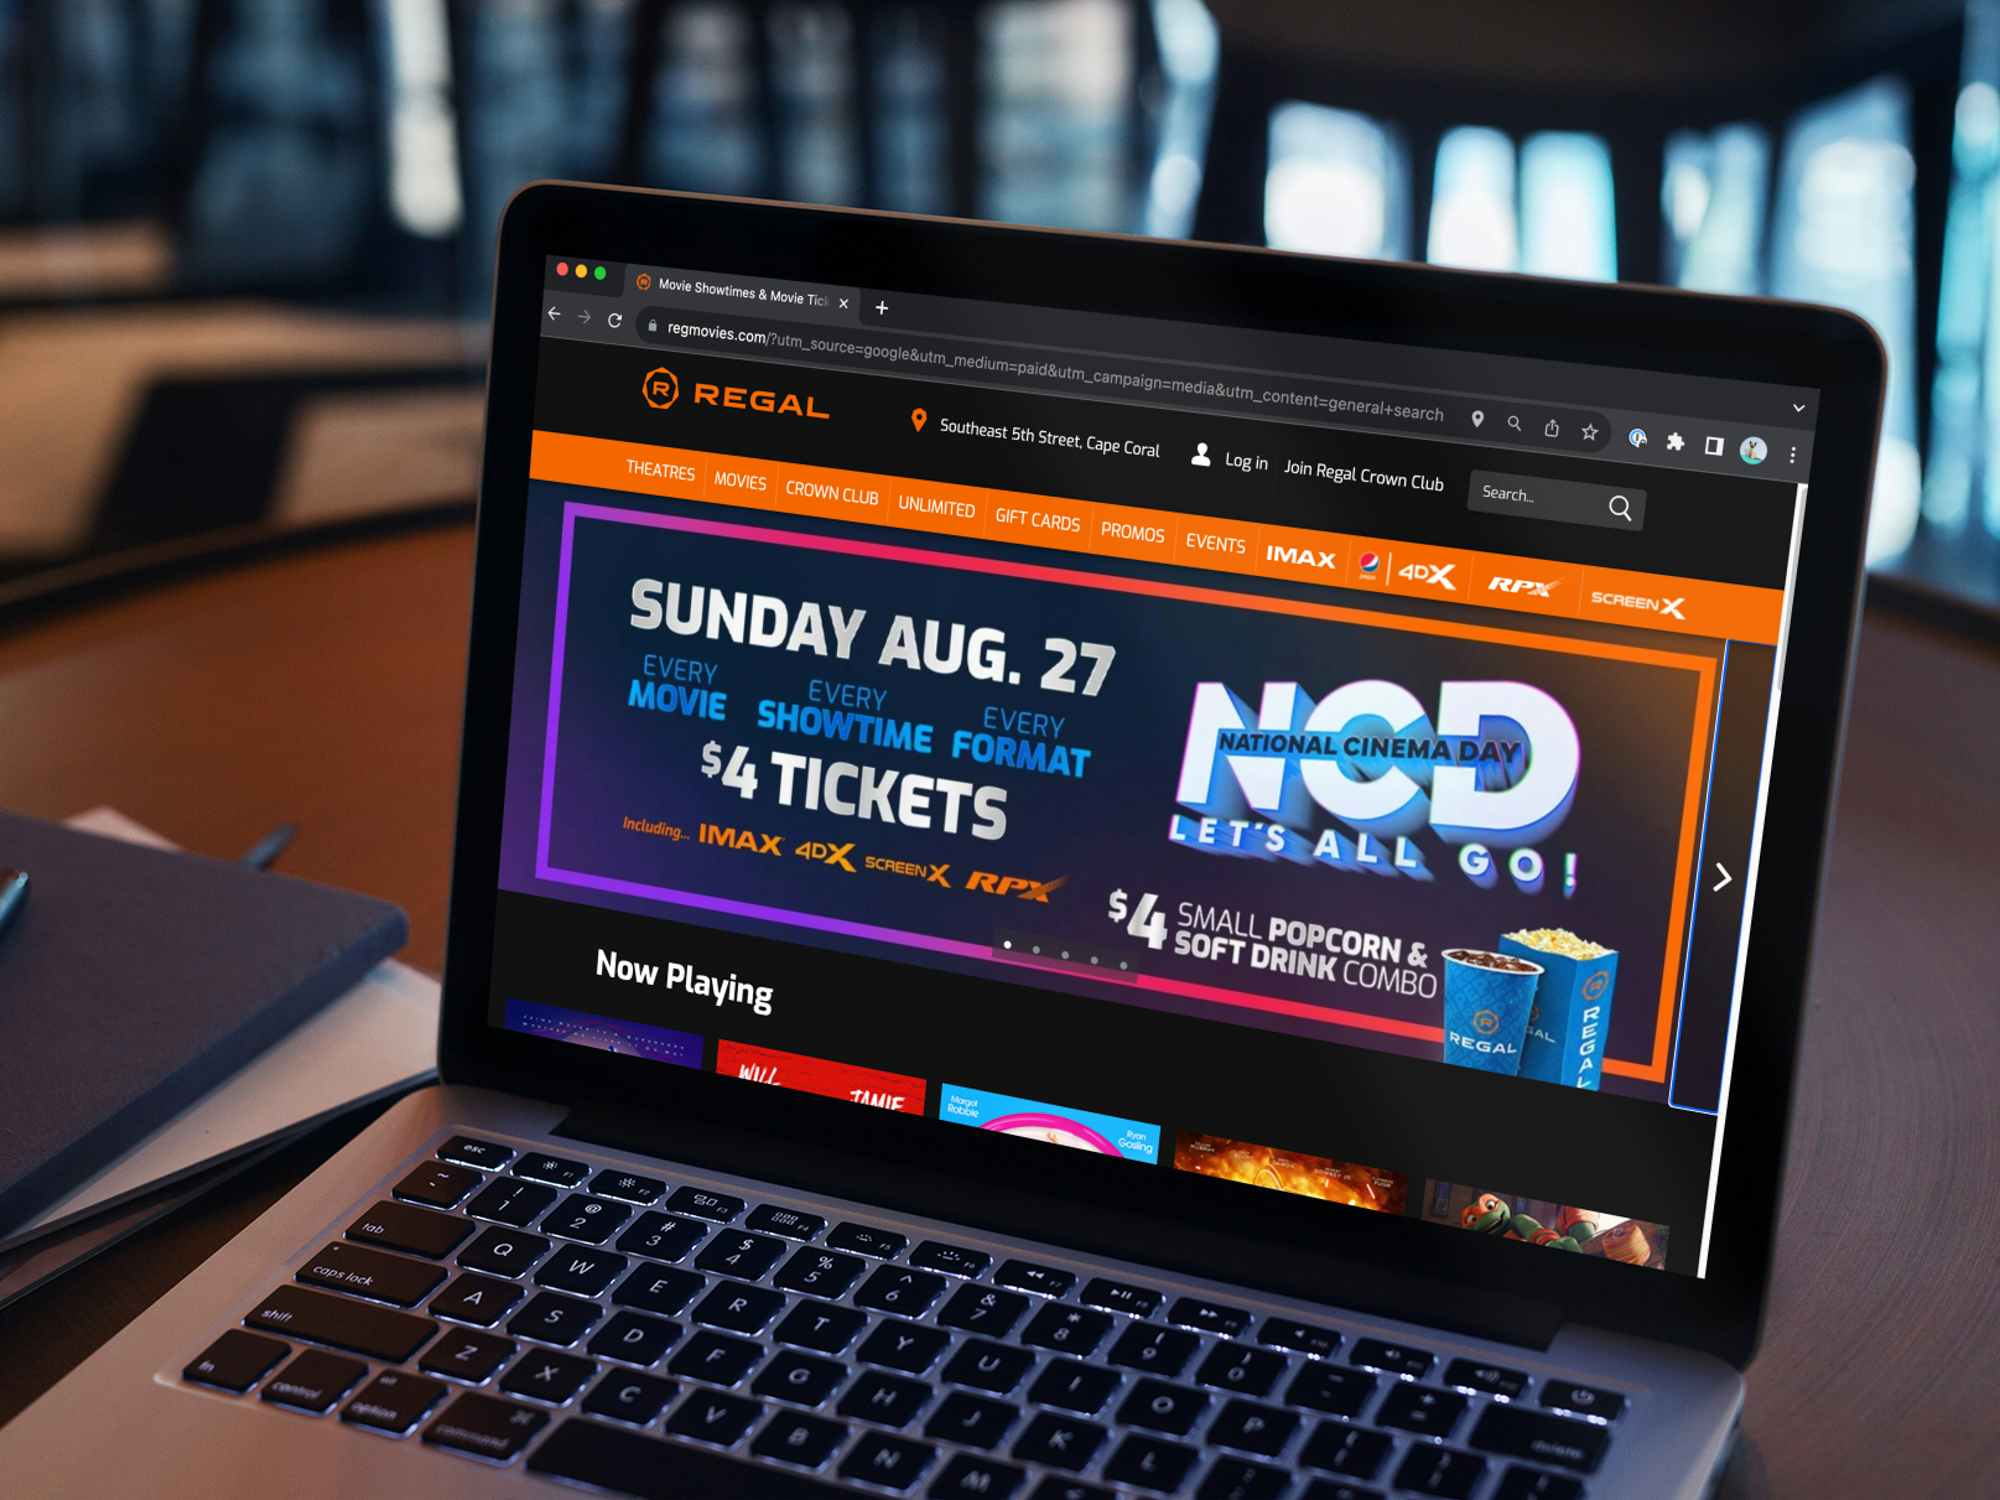 National Cinema Day to Offer $4 Movie Tickets on Sunday, August 27th, Chaz's Journal